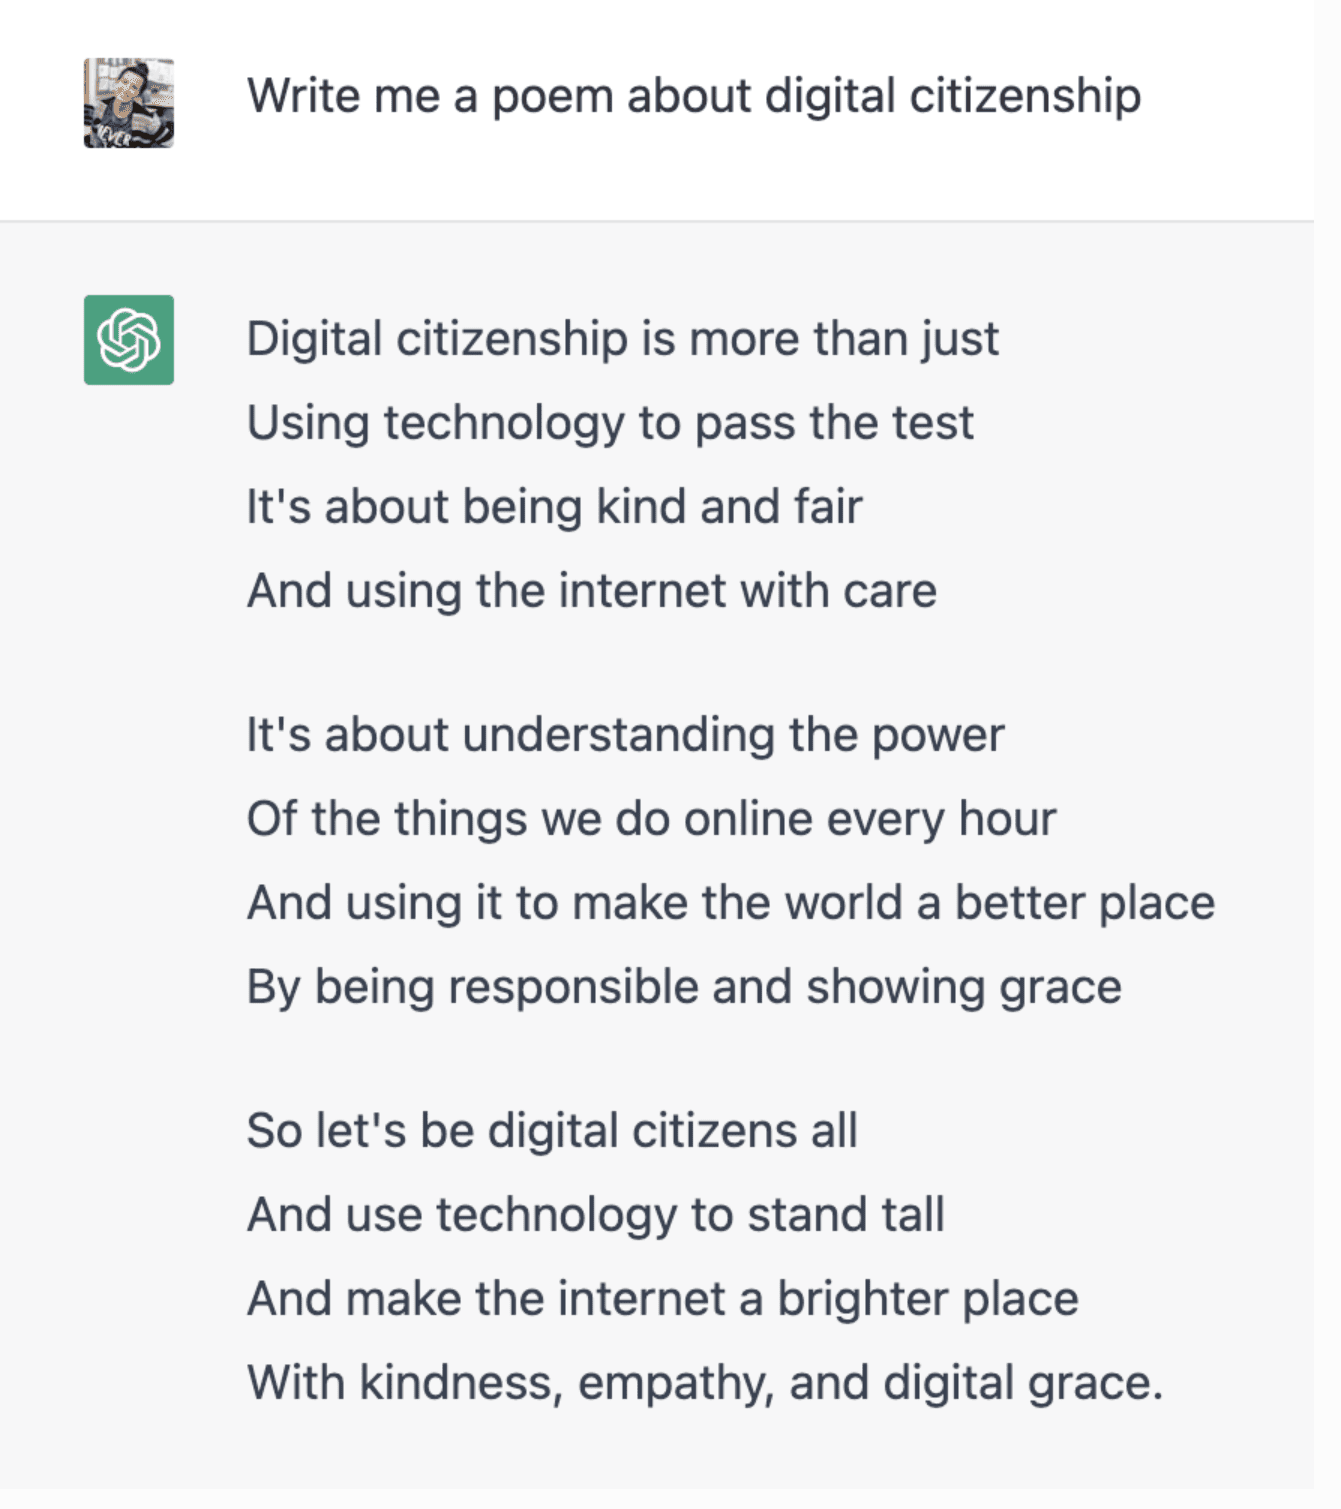 A poem generated by an AI writing tool on digital citizenship